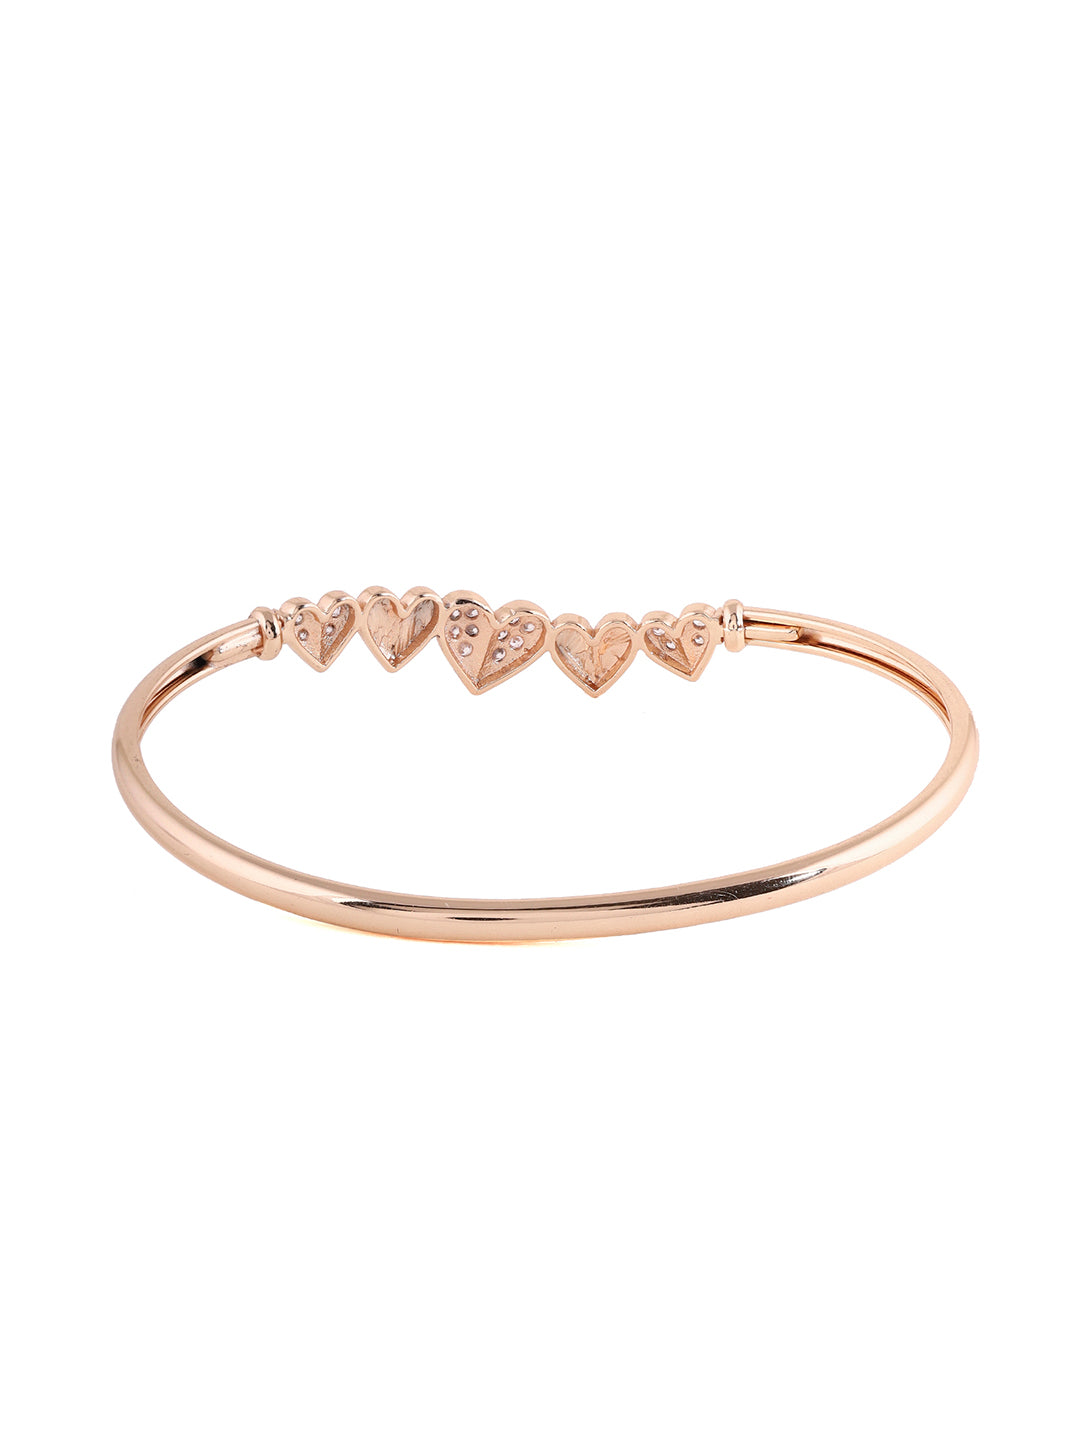 Prita Gold Plated Sequence Heart Bracelet